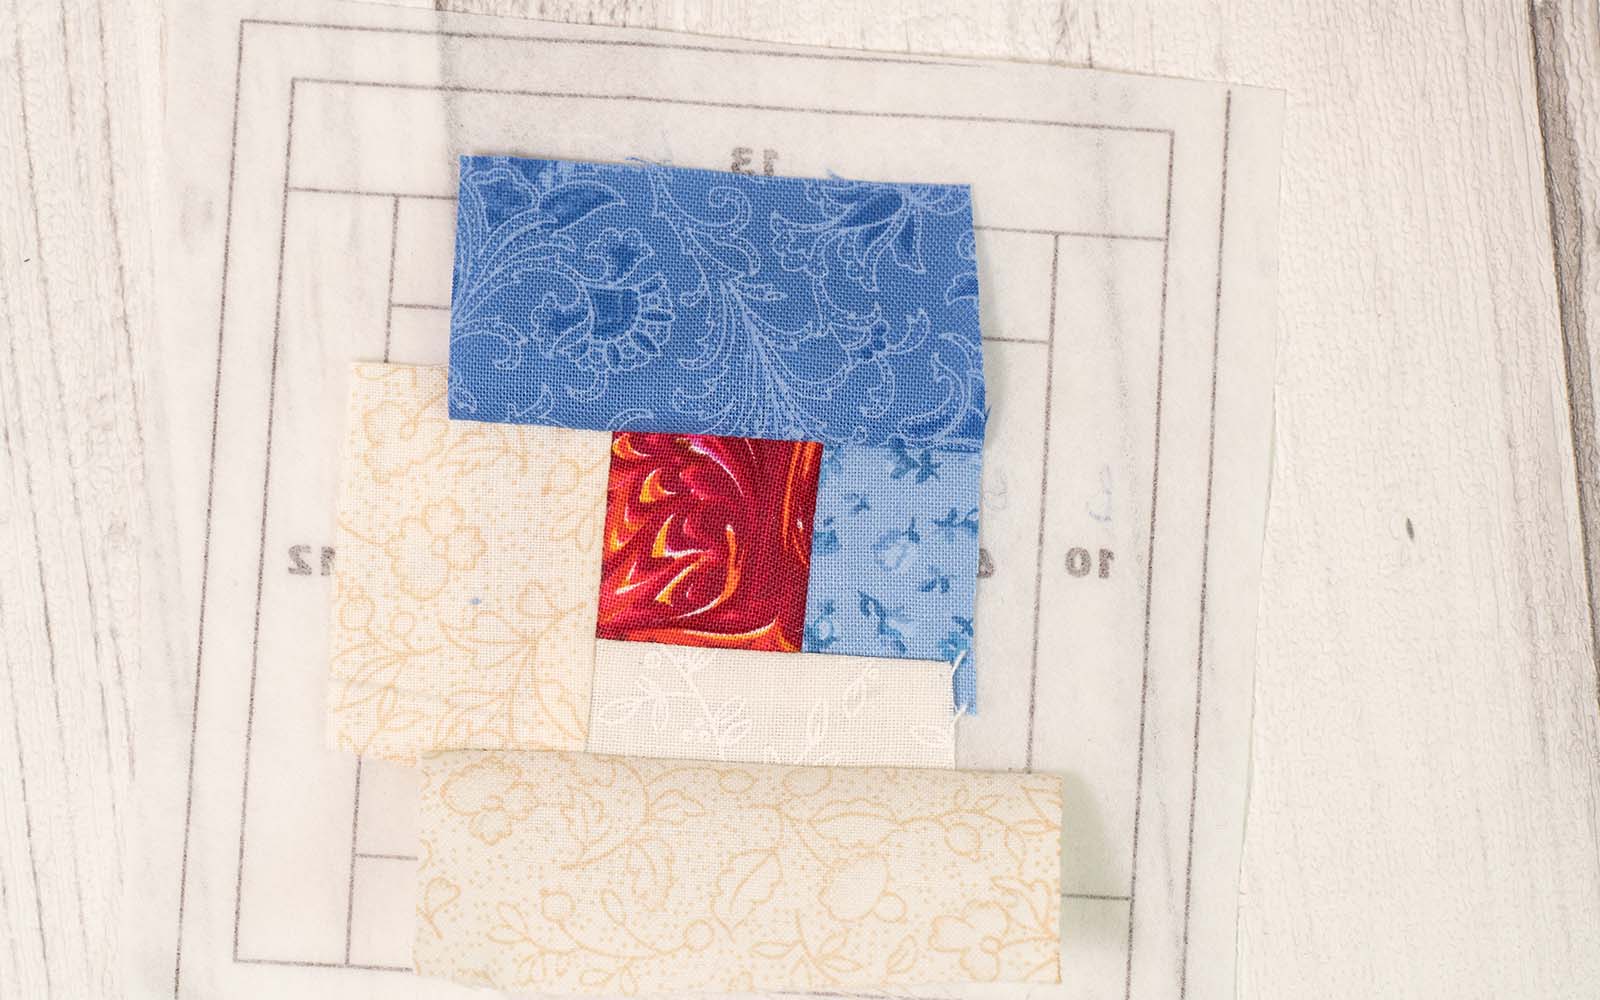 Foundation Piecing Paper That Patchwork Place by Martingale - 9781564772541  Quilting Notions